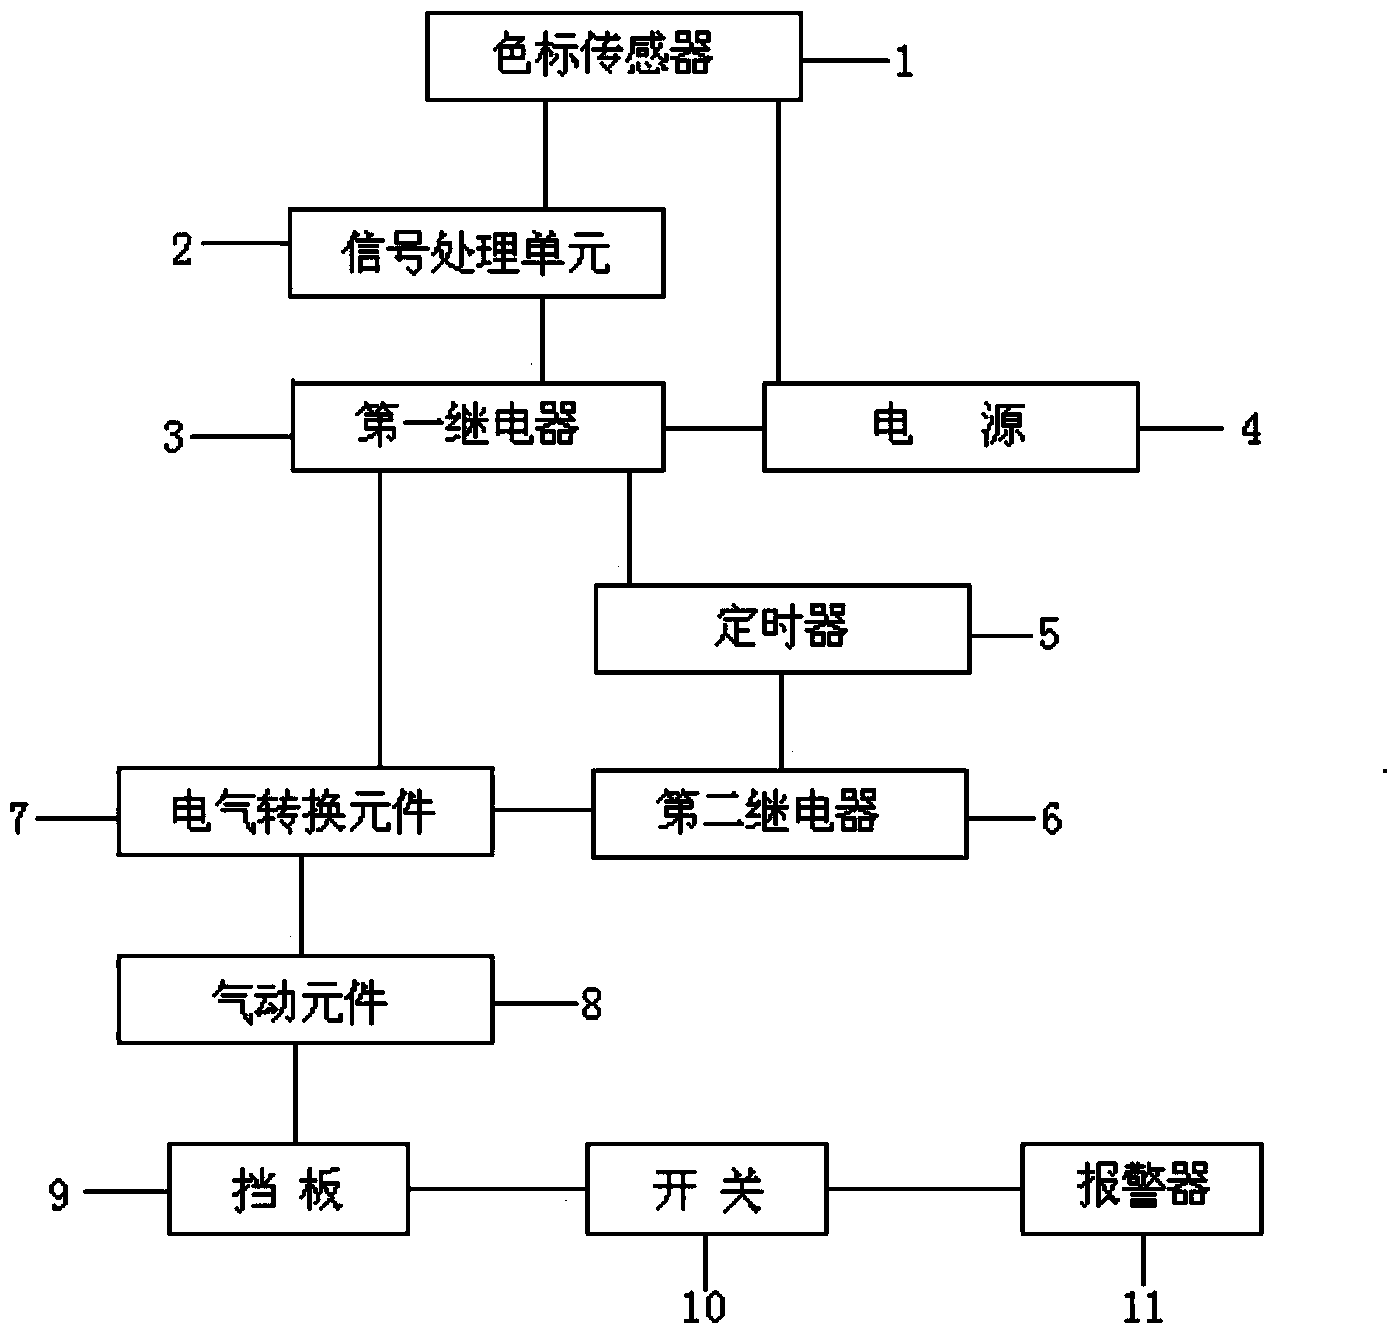 Automatic detection device for electric meter certificate